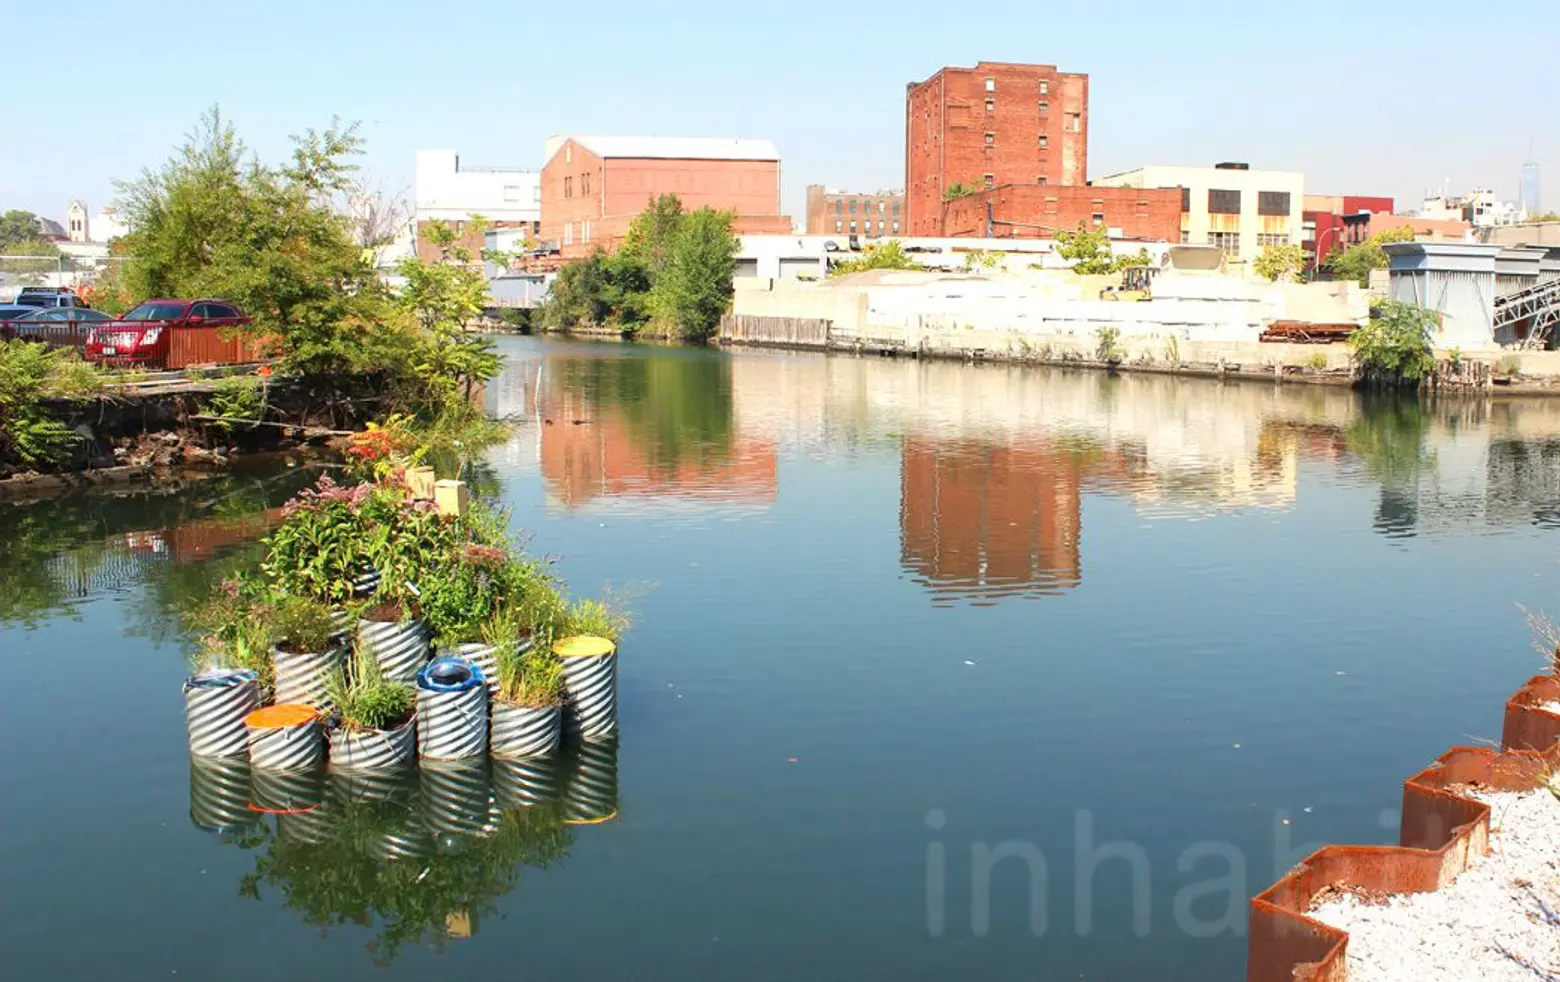 Water-Filtering Garden Floats in the Gowanus; It’s the Best Month to Go to the Farmers Market